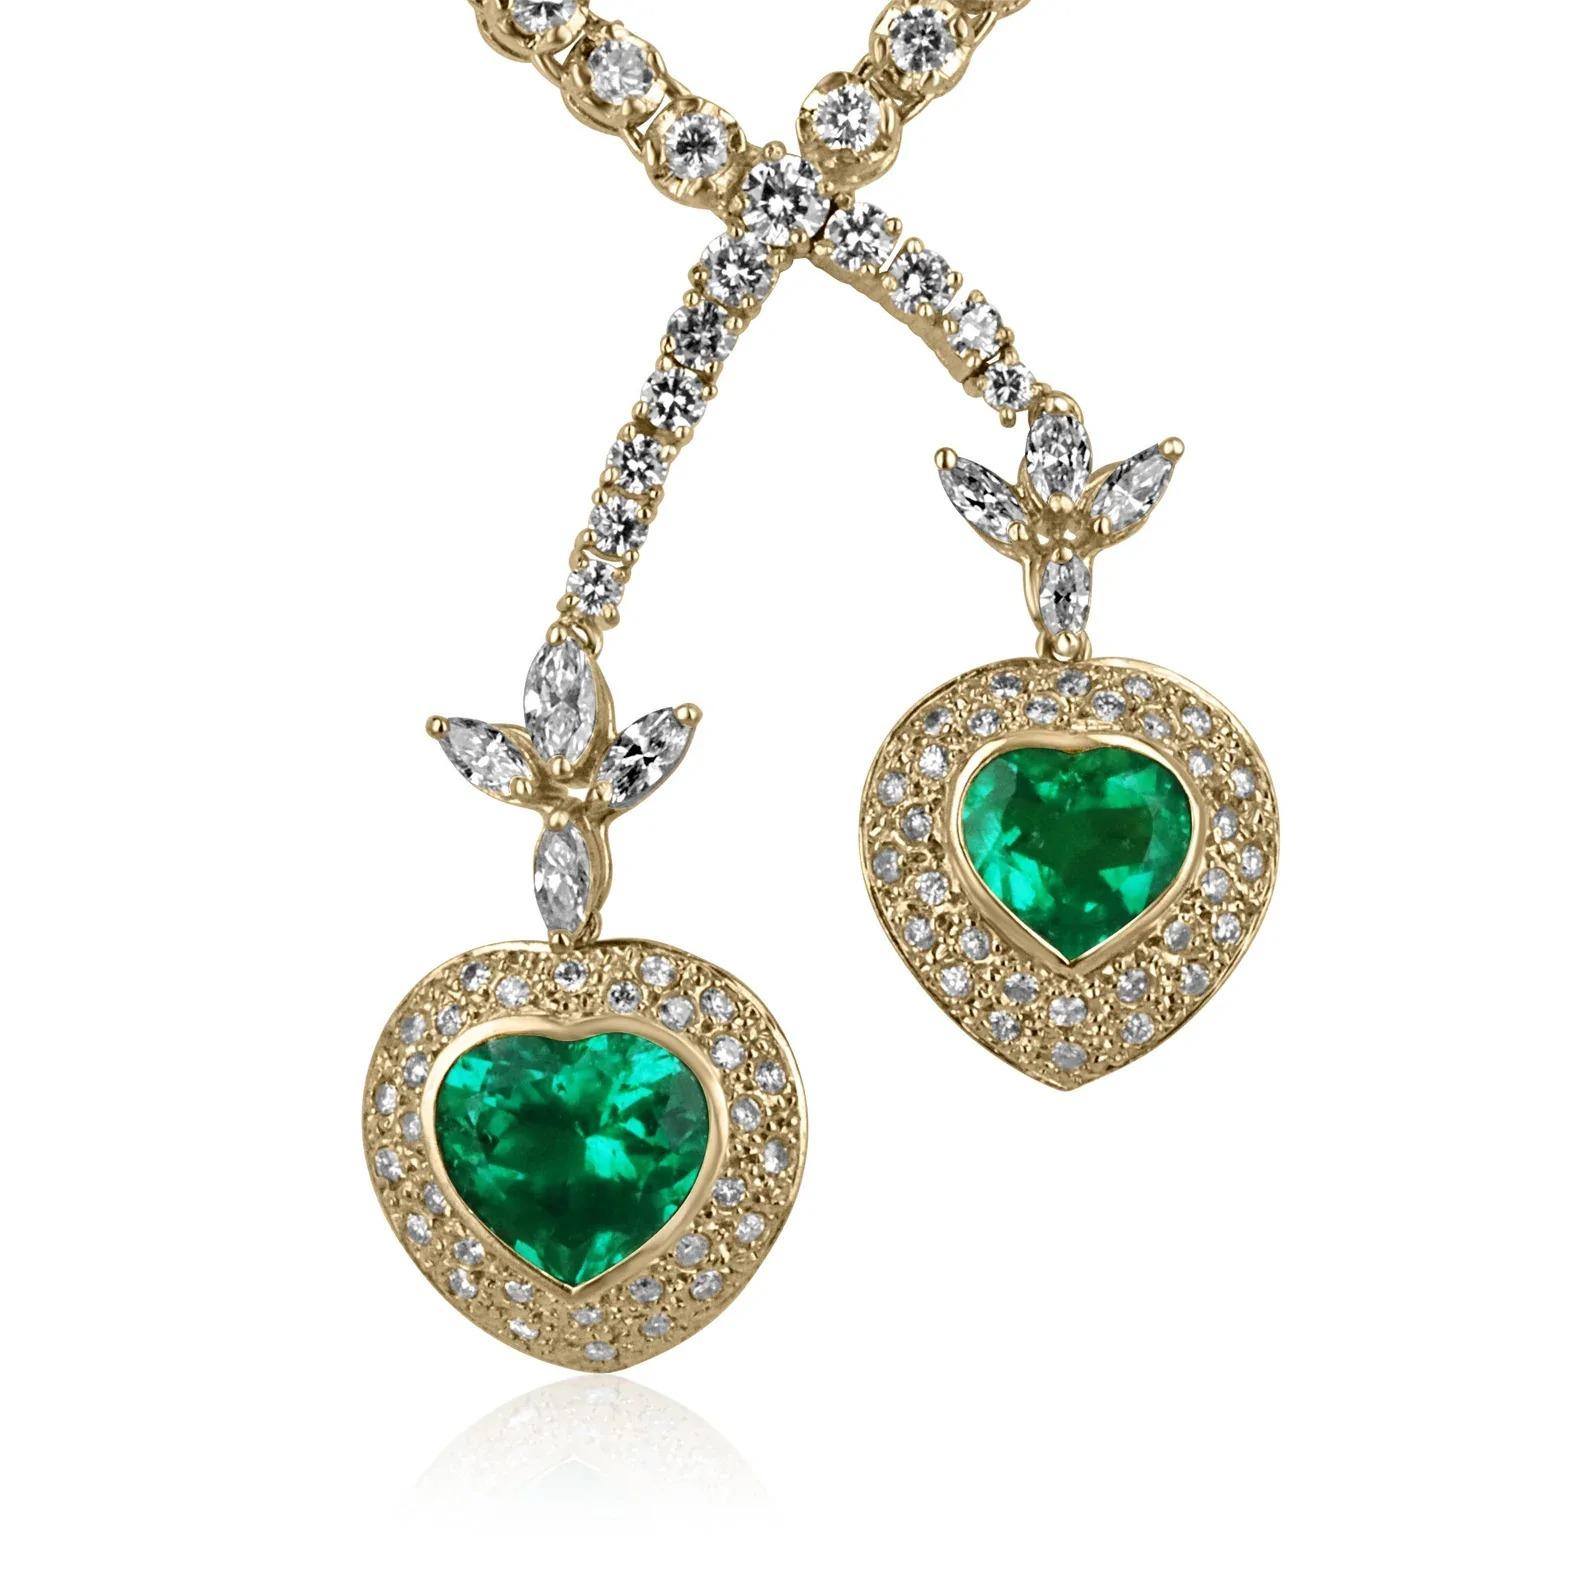 Displayed is an incandescent, Muzo green Colombian emerald heart and diamond lariat/tennis necklace. Investment grade, earth-mined emeralds weigh a total of 5.50 carats and are bezel set in diamond pave, handmade setting. One hundred eighty-three